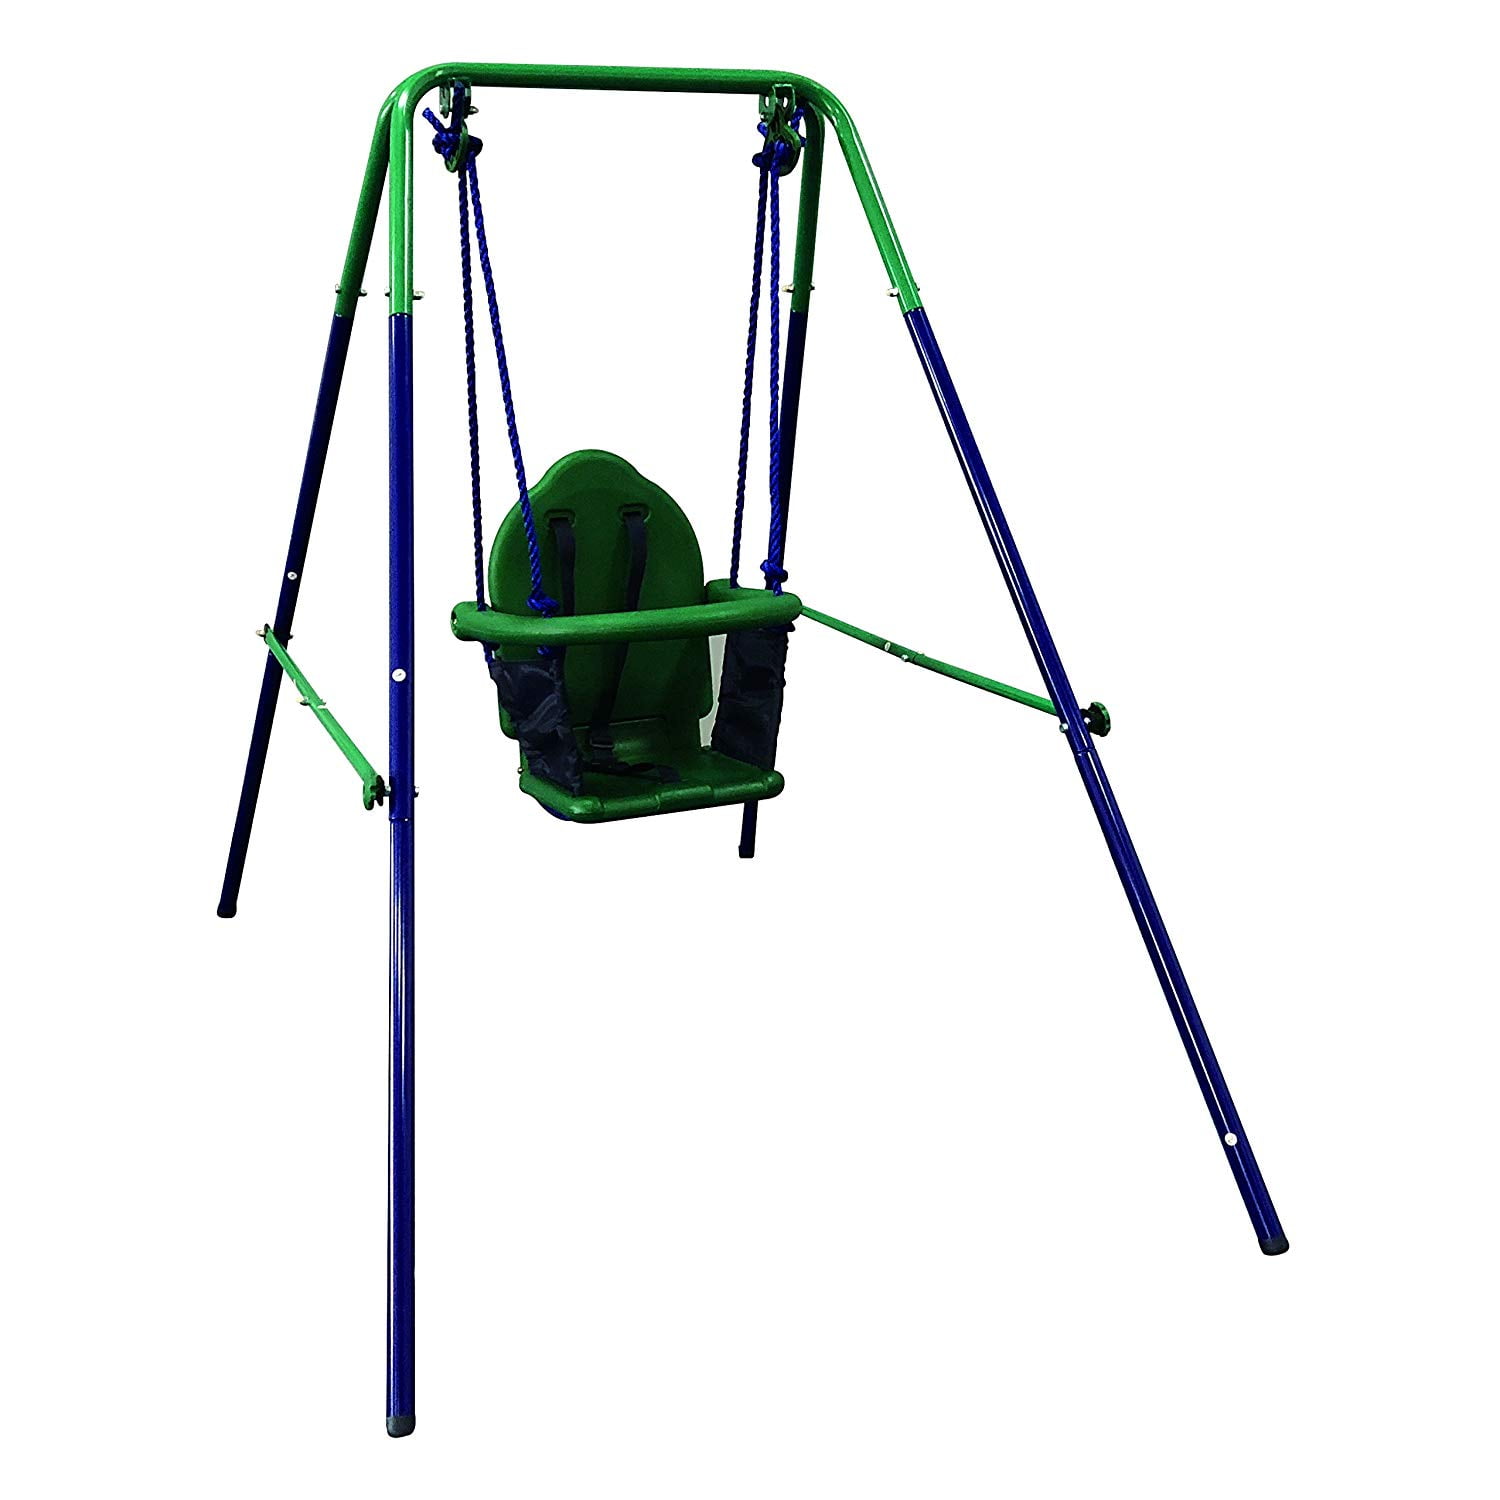 GMT Sport Baby Outdoor Folding Toddler Swing with Safety Belt